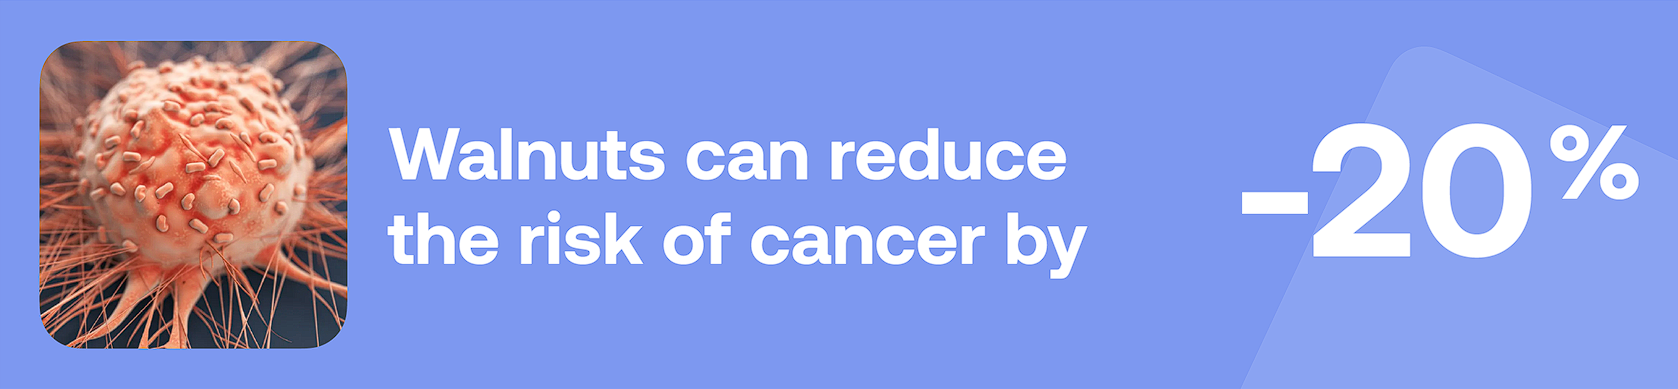 Walnuts can reduce the risk of cancer by -20%